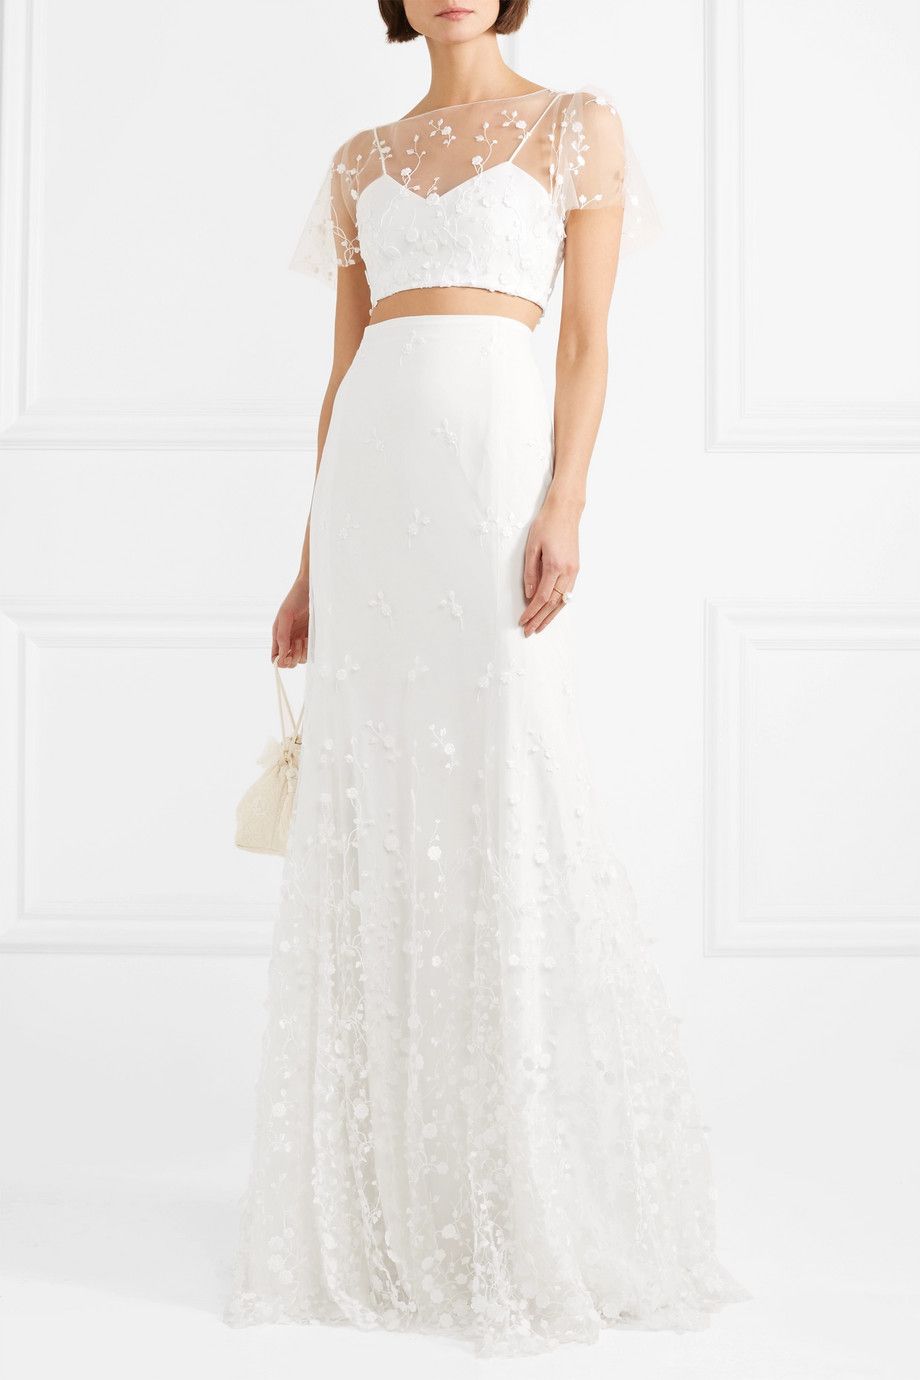 16 non-traditional wedding outfits for the fashion-forward bride